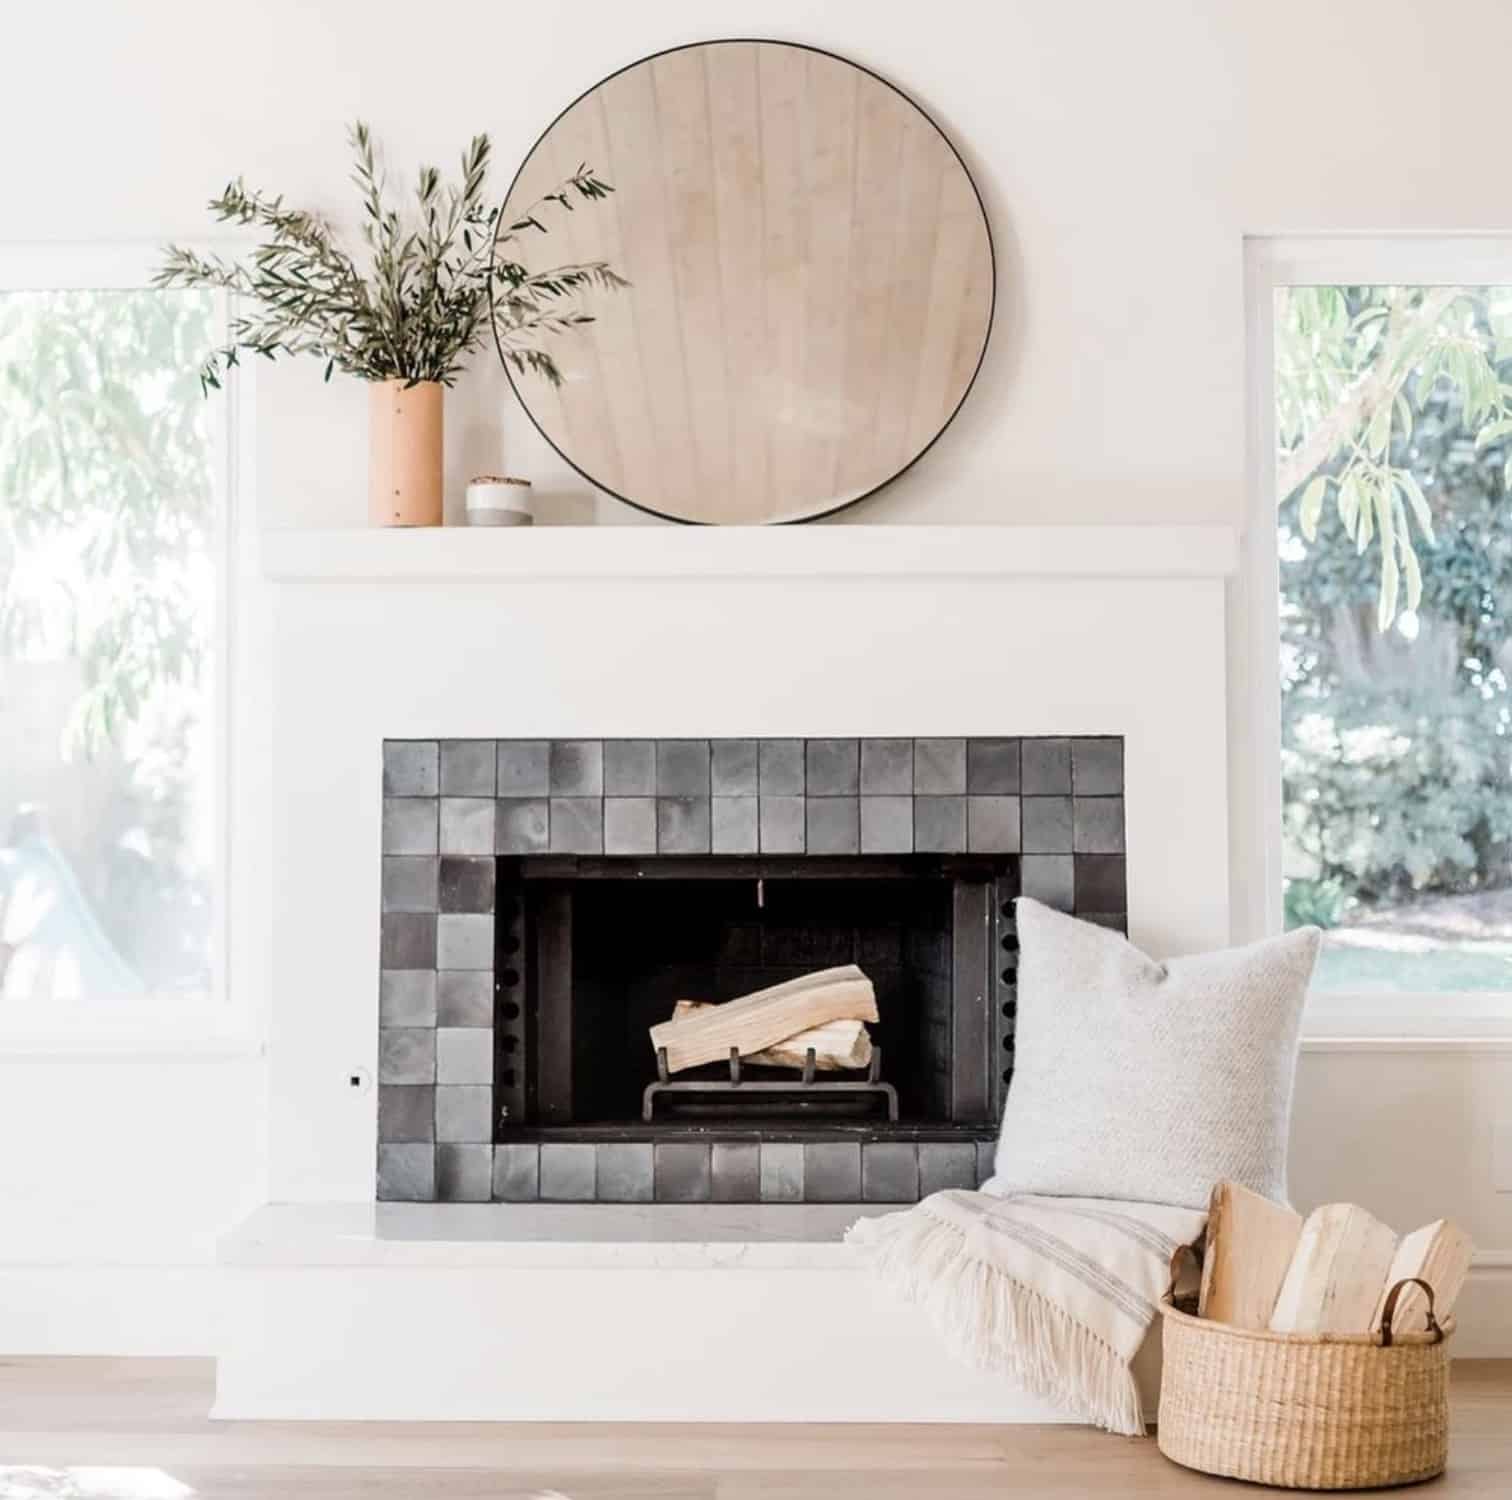 20 Easy Fireplace Tile Ideas To Remodel, Modern Fireplace Tile Ideas